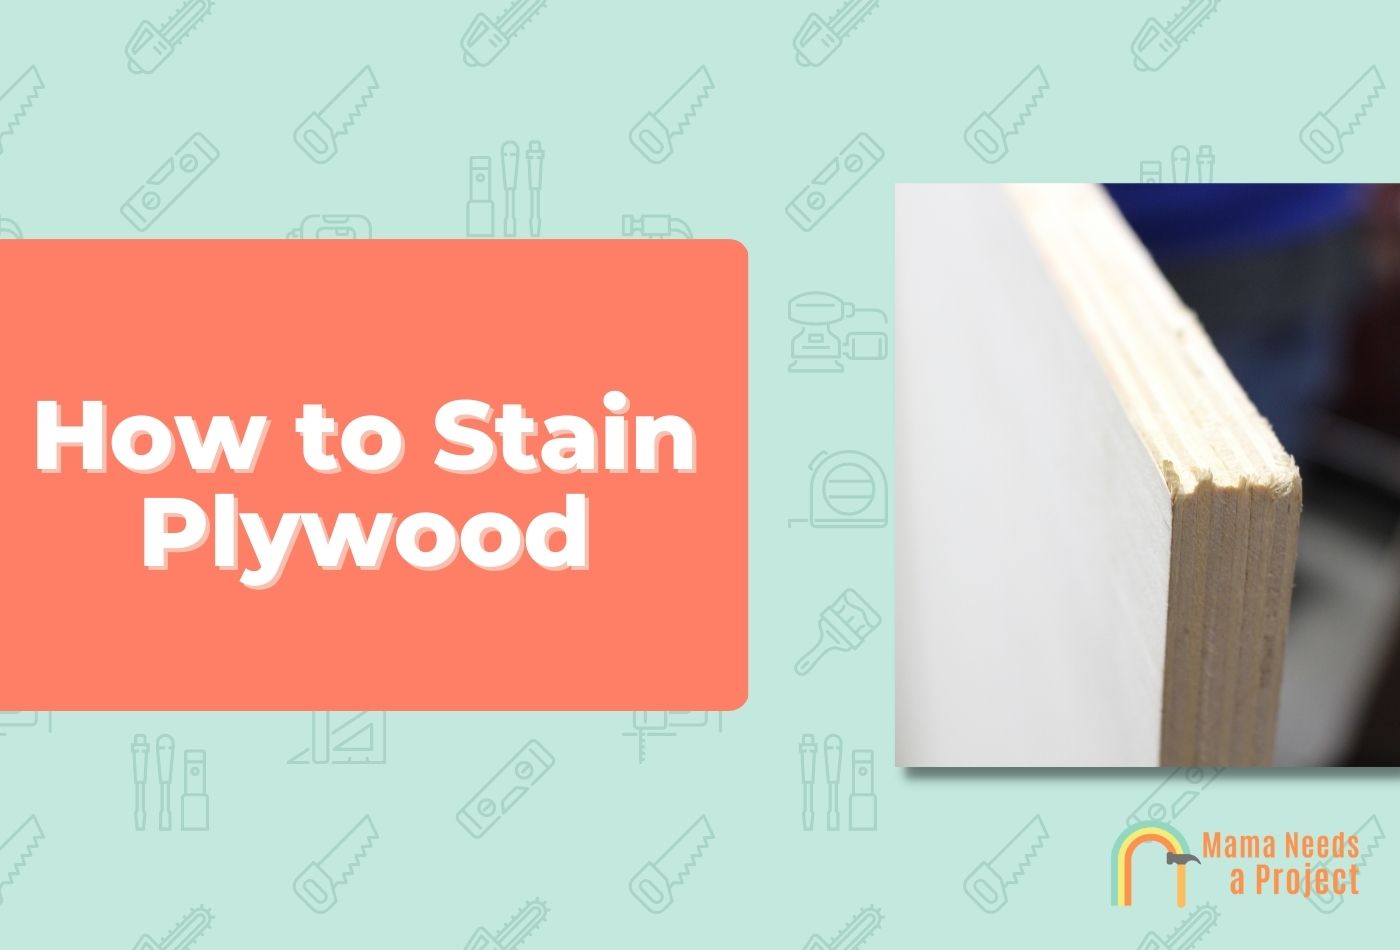 How to Stain Plywood